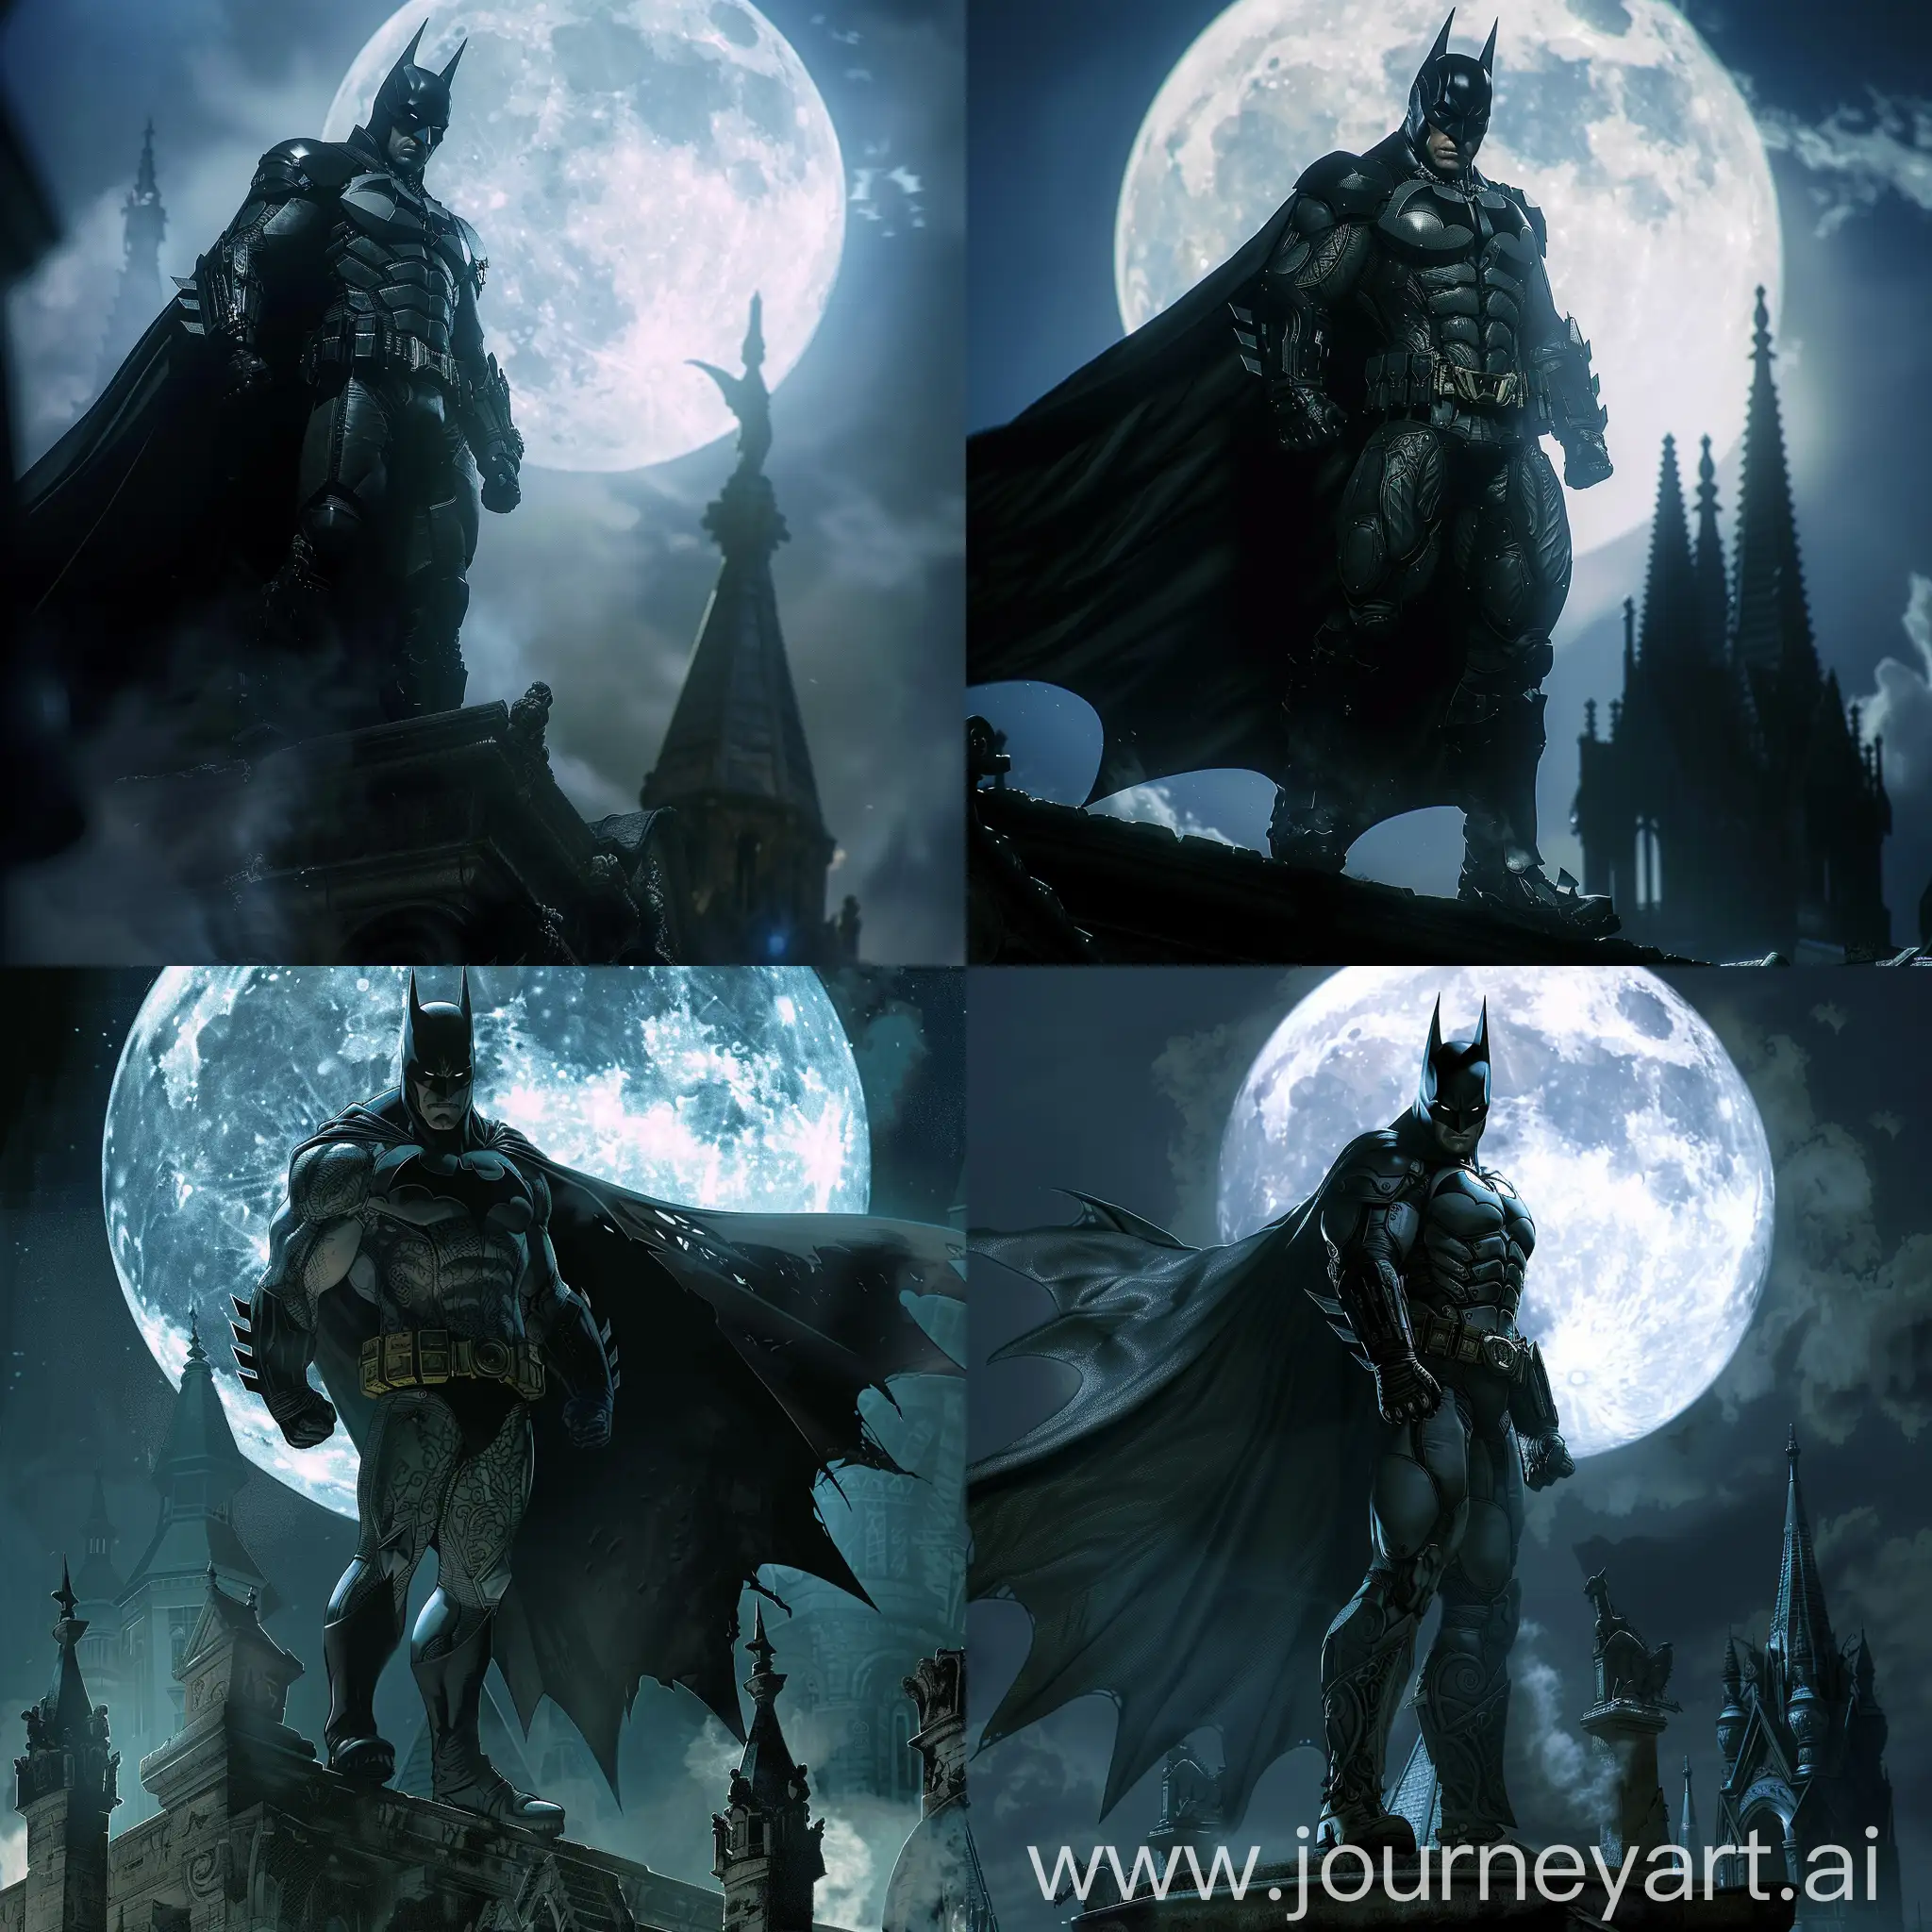 Here’s a detailed description of Batman in a gothic style:  Batman stands on a rooftop at night, his silhouette stark against a full moon. His suit is a deep, shadowy black, adorned with intricate gothic patterns resembling the ornate designs found in gothic cathedrals. His cape flows dramatically in the night wind, adding to the mysterious and dark ambiance. The background features gothic architecture with spires and gargoyles, and a misty atmosphere that enhances the eerie, foreboding feel. Shadows play across his stern face, highlighting his intense expression and the sharp angles of his cowl. The entire scene is bathed in a moody, monochromatic palette, emphasizing the gothic theme.